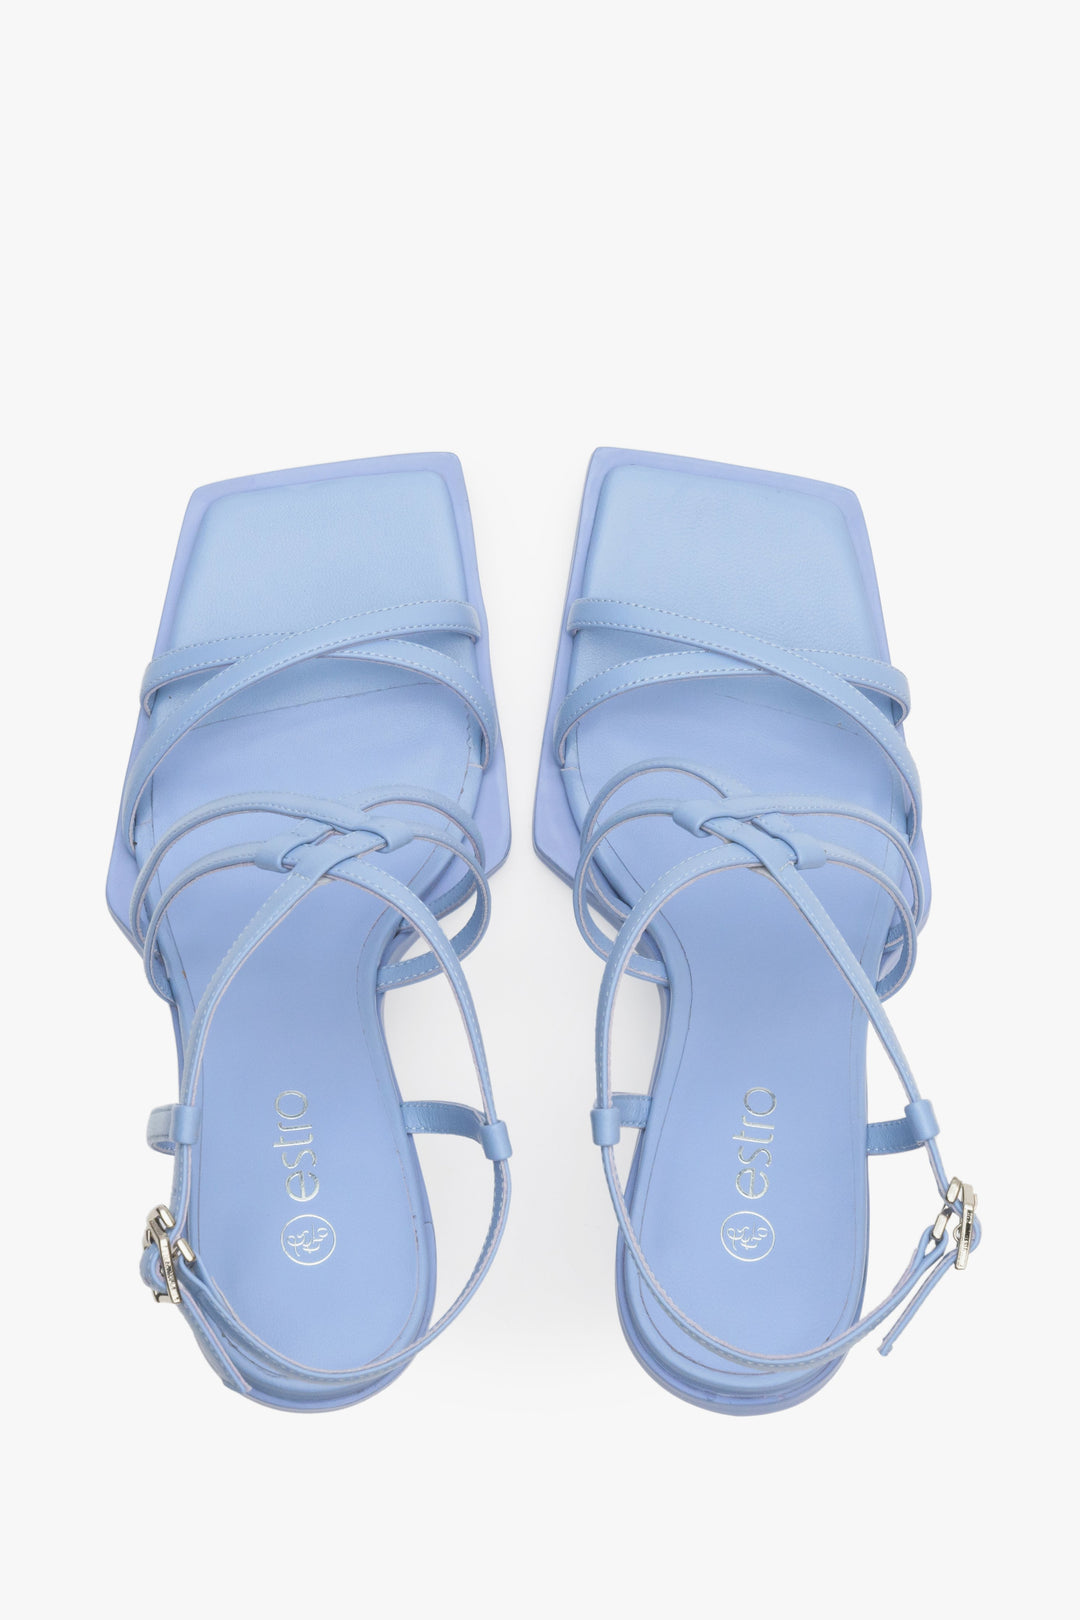 Light blue leather strappy sandals with square toe - presentation from above.